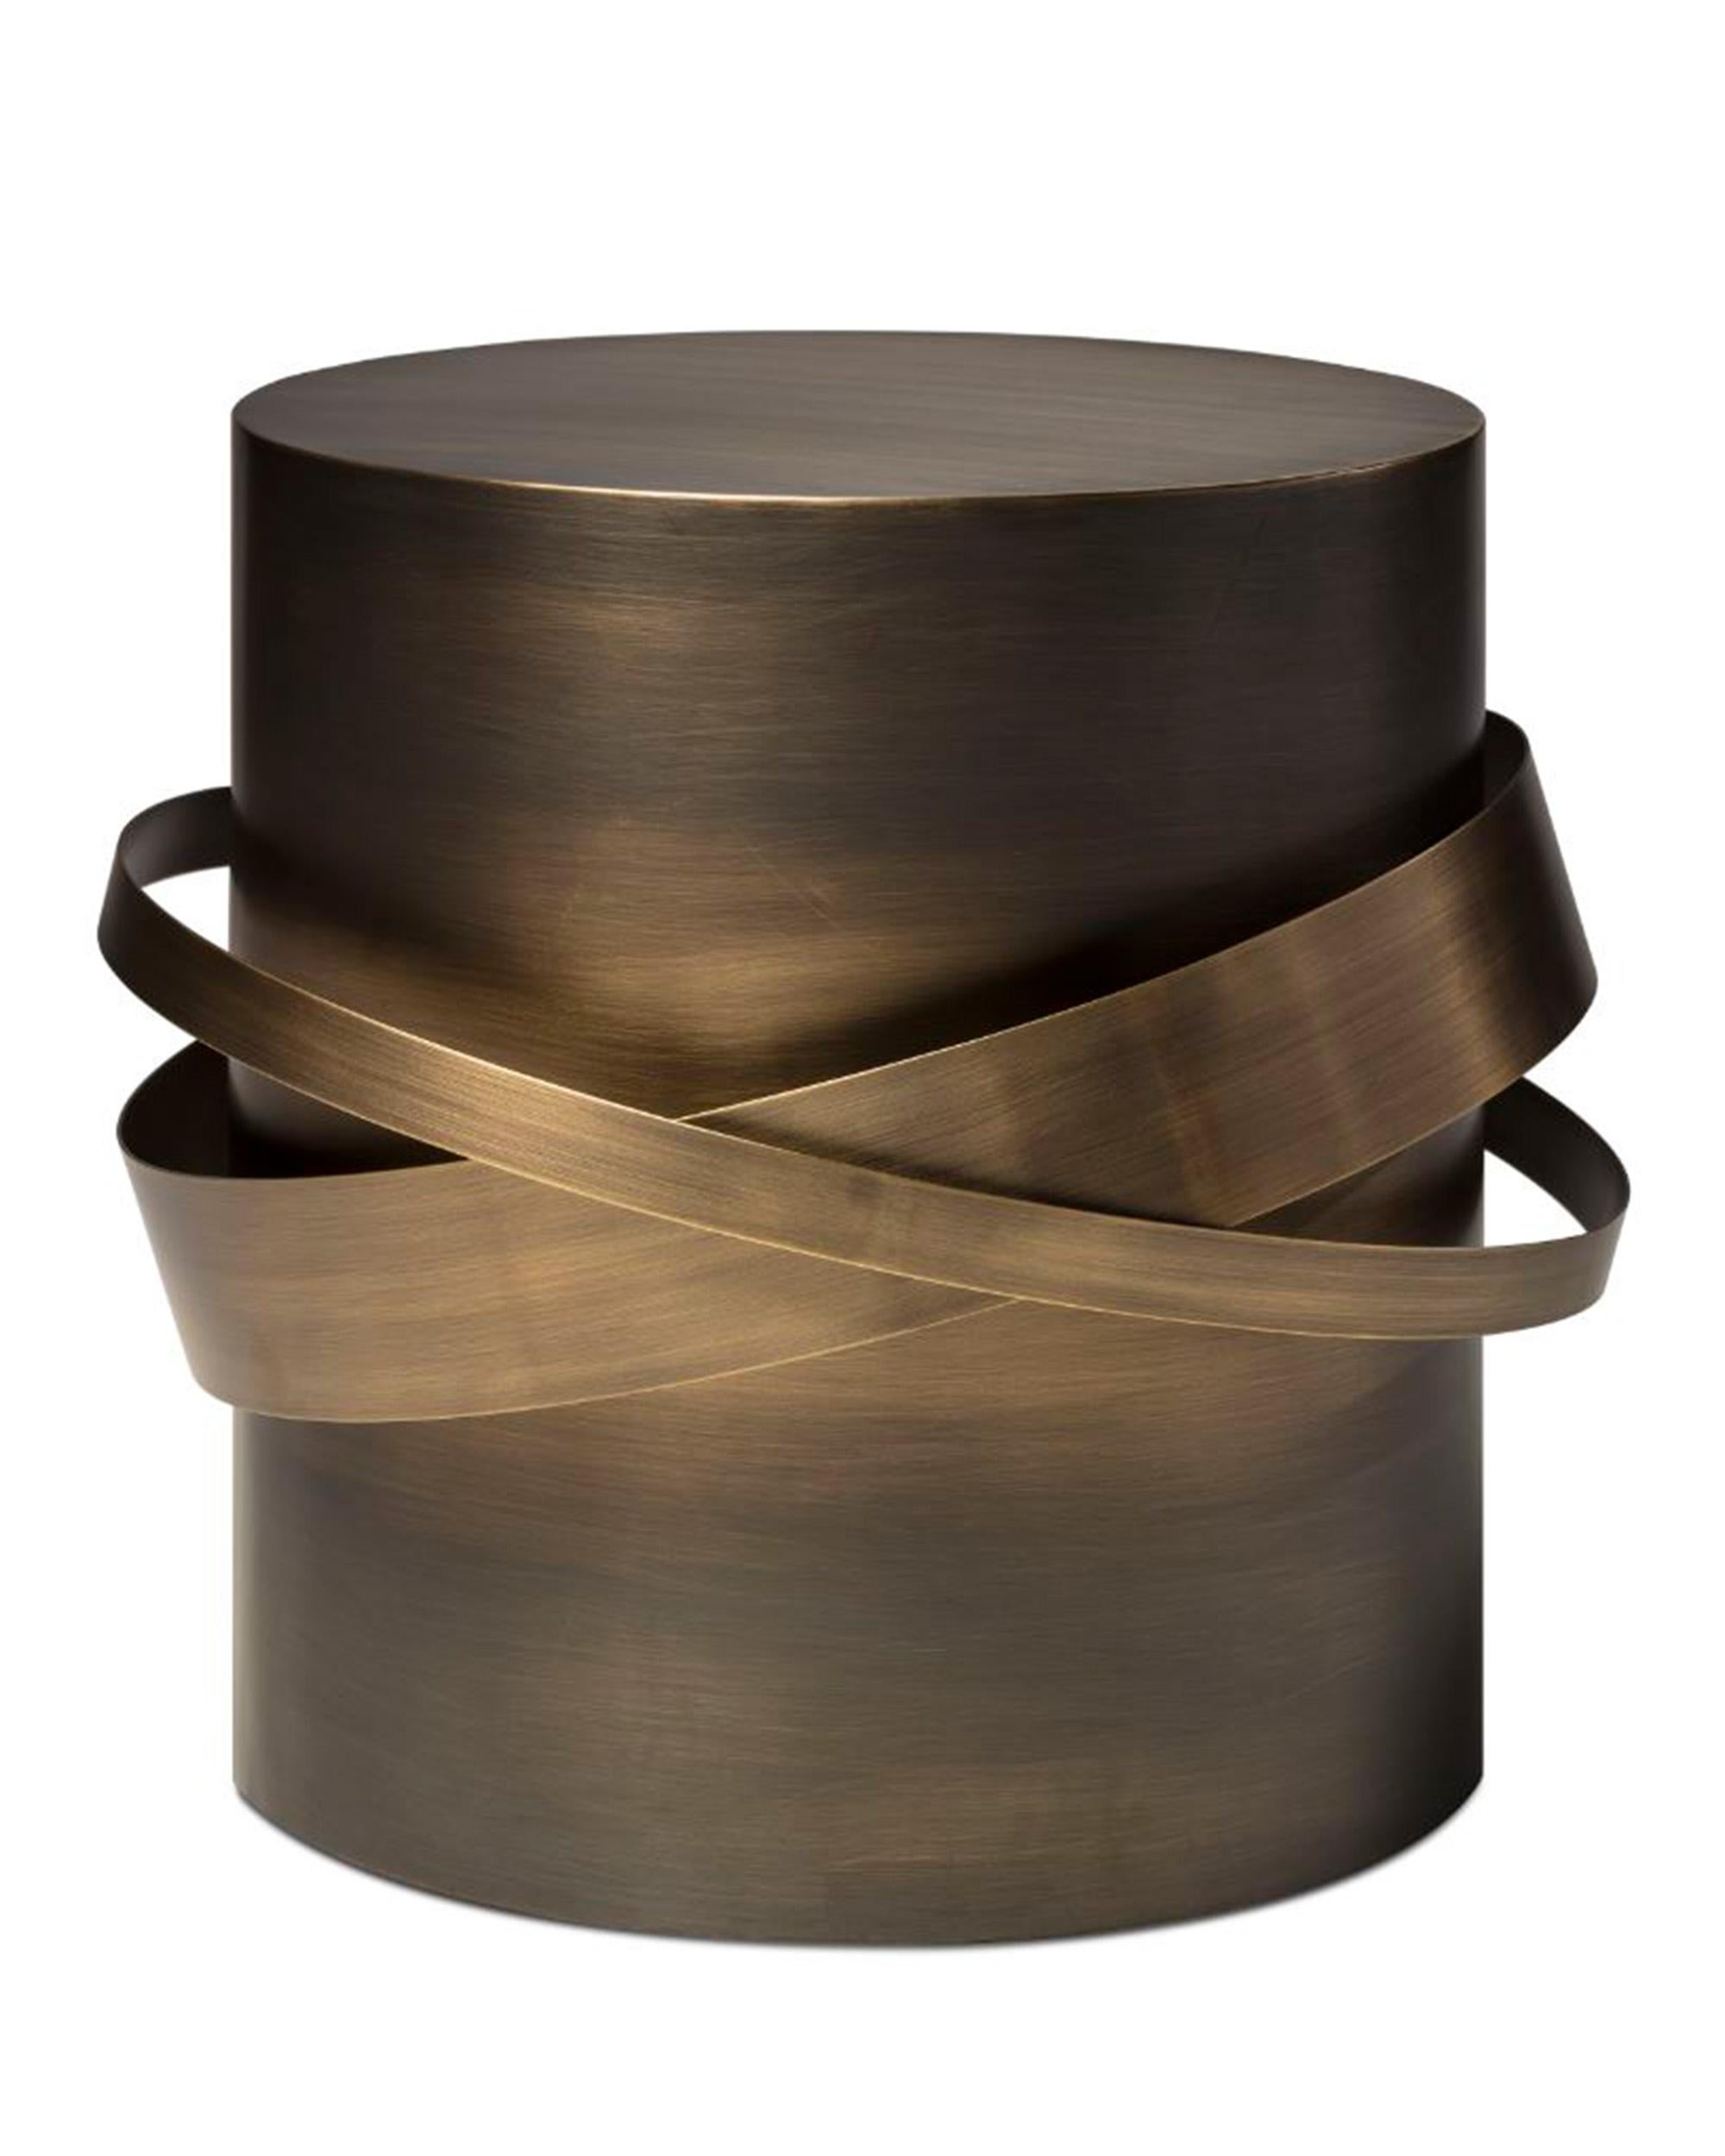 Orbit Accent Table, in Dark Bronze, Handcrafted in Portugal by Duistt

Orbit accent table has the structure involved by two rings which provides a graceful feeling of movement and stillness at the same time, allowing you to adapt the side table to